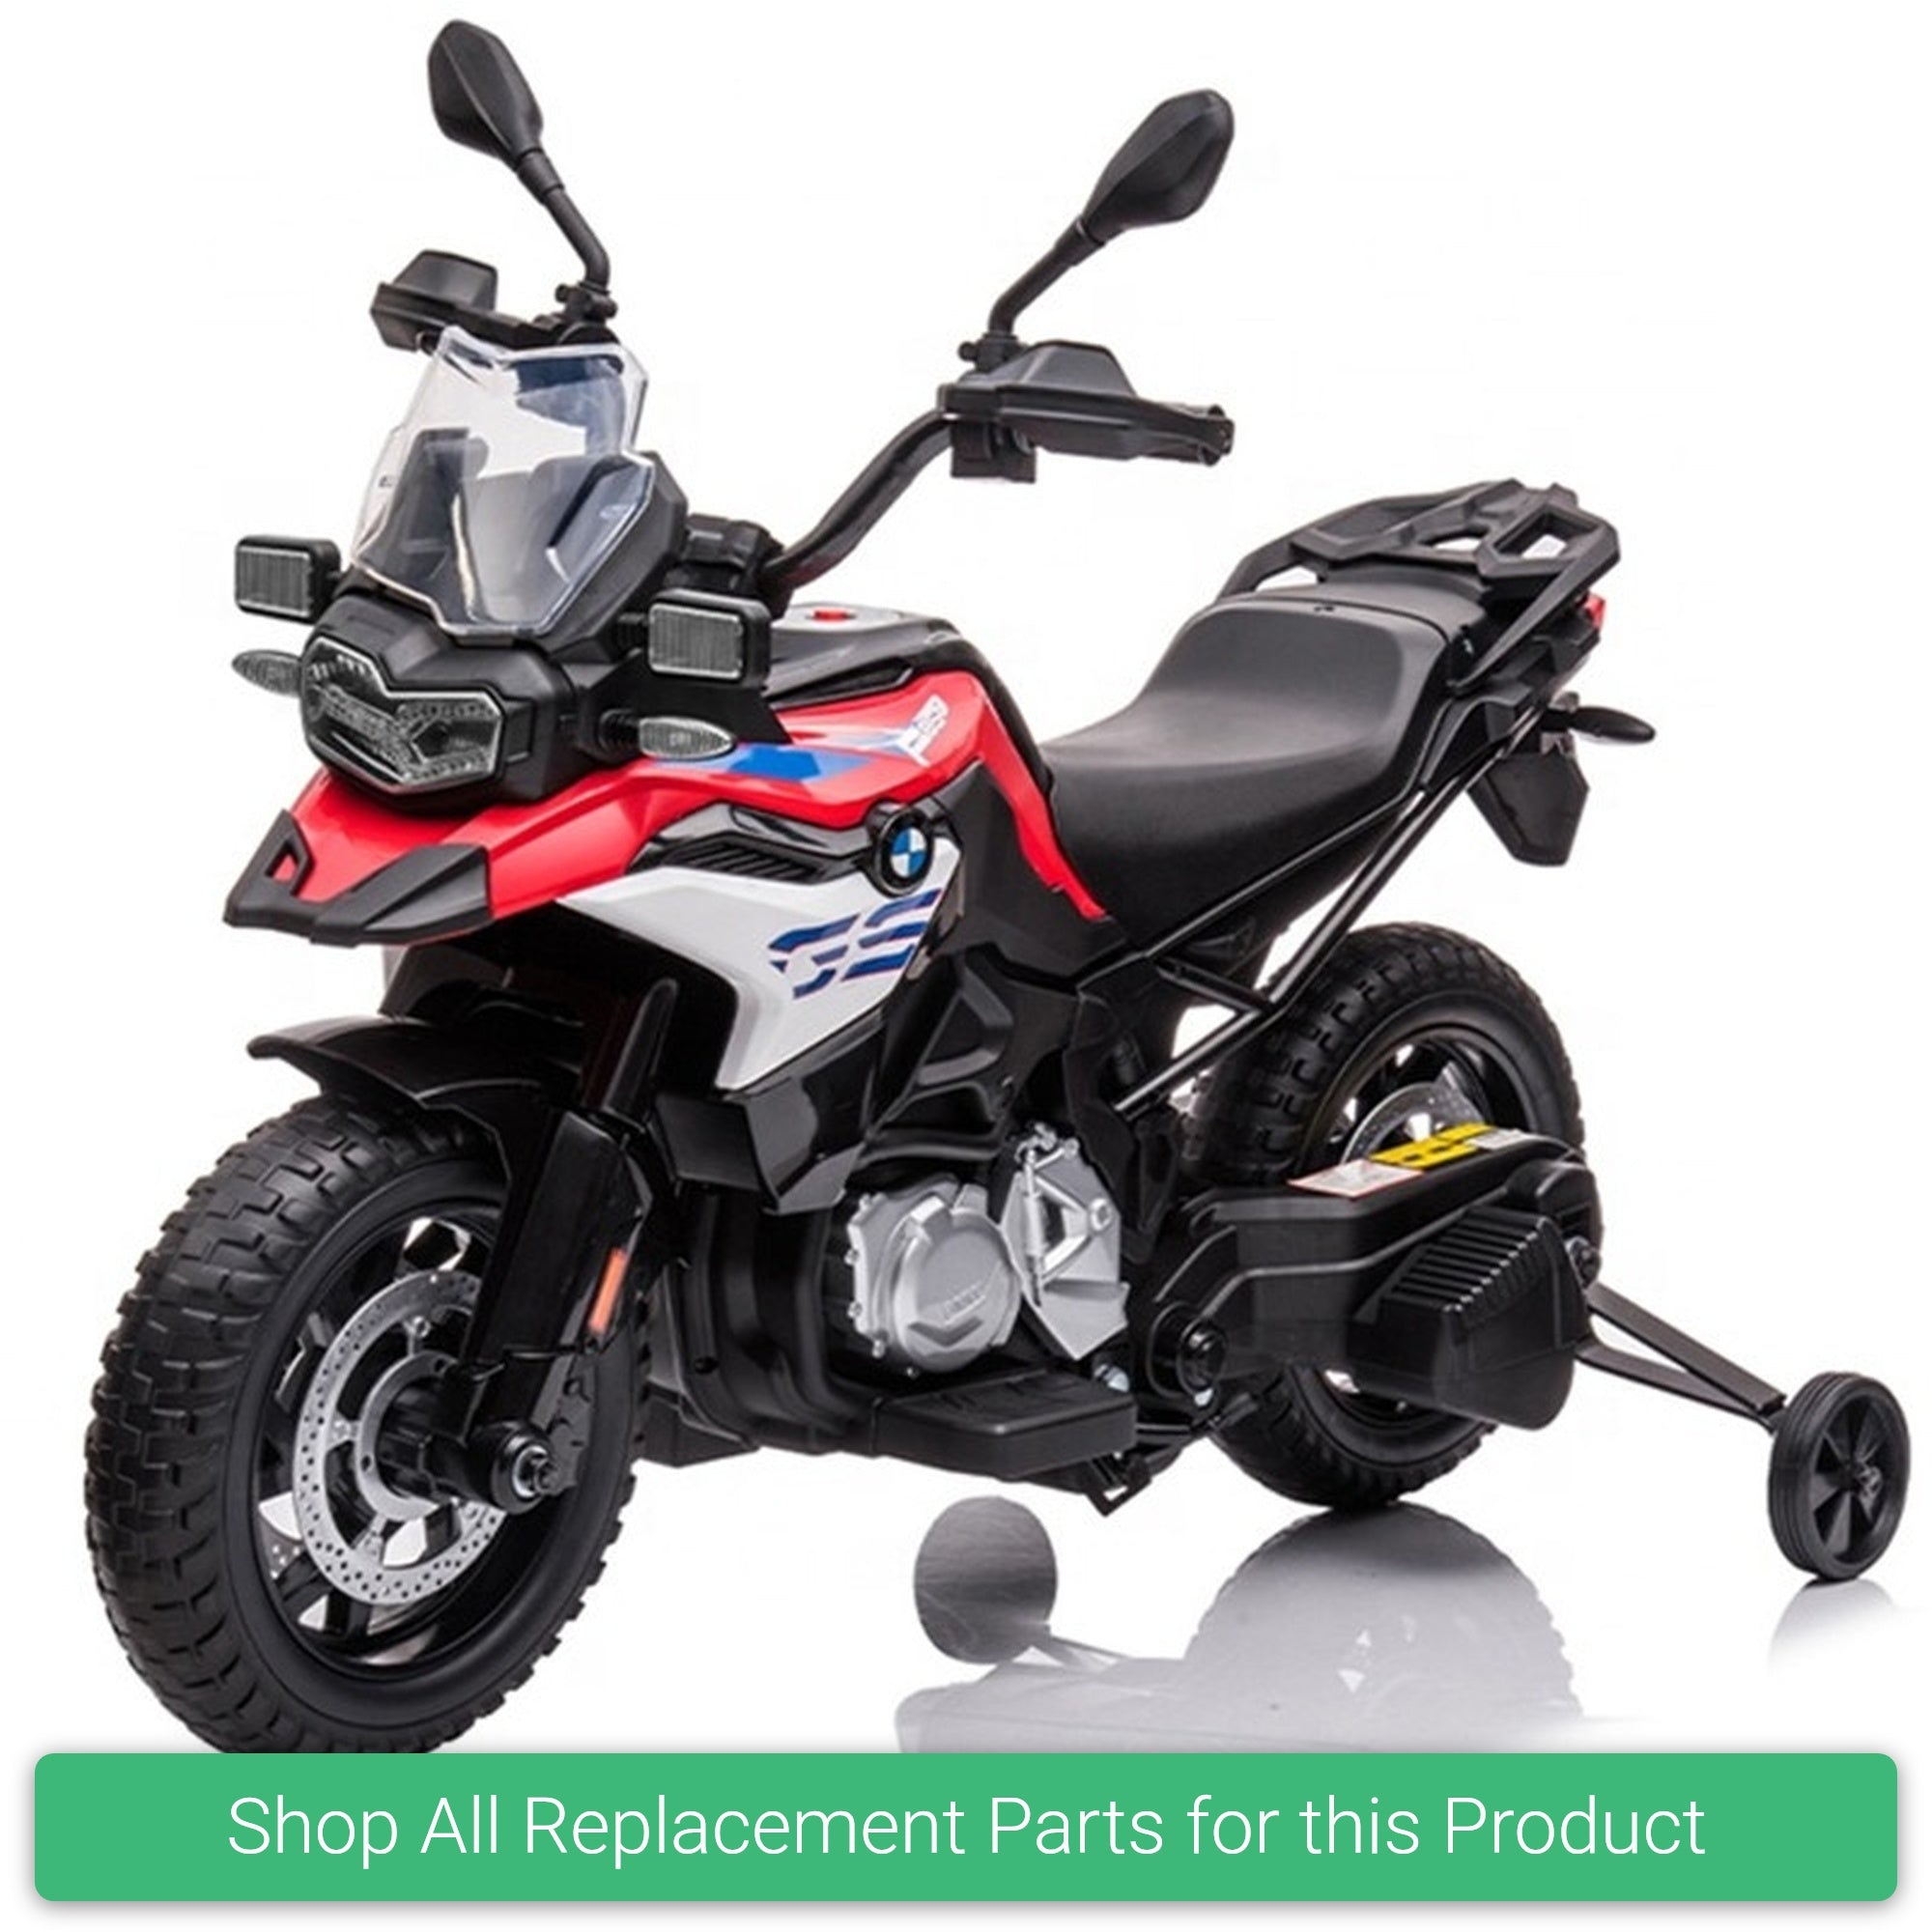 Replacement Parts and Spares for Kids BMW F850 GS Motorbike - BMW-F850-VARI - JT5002A